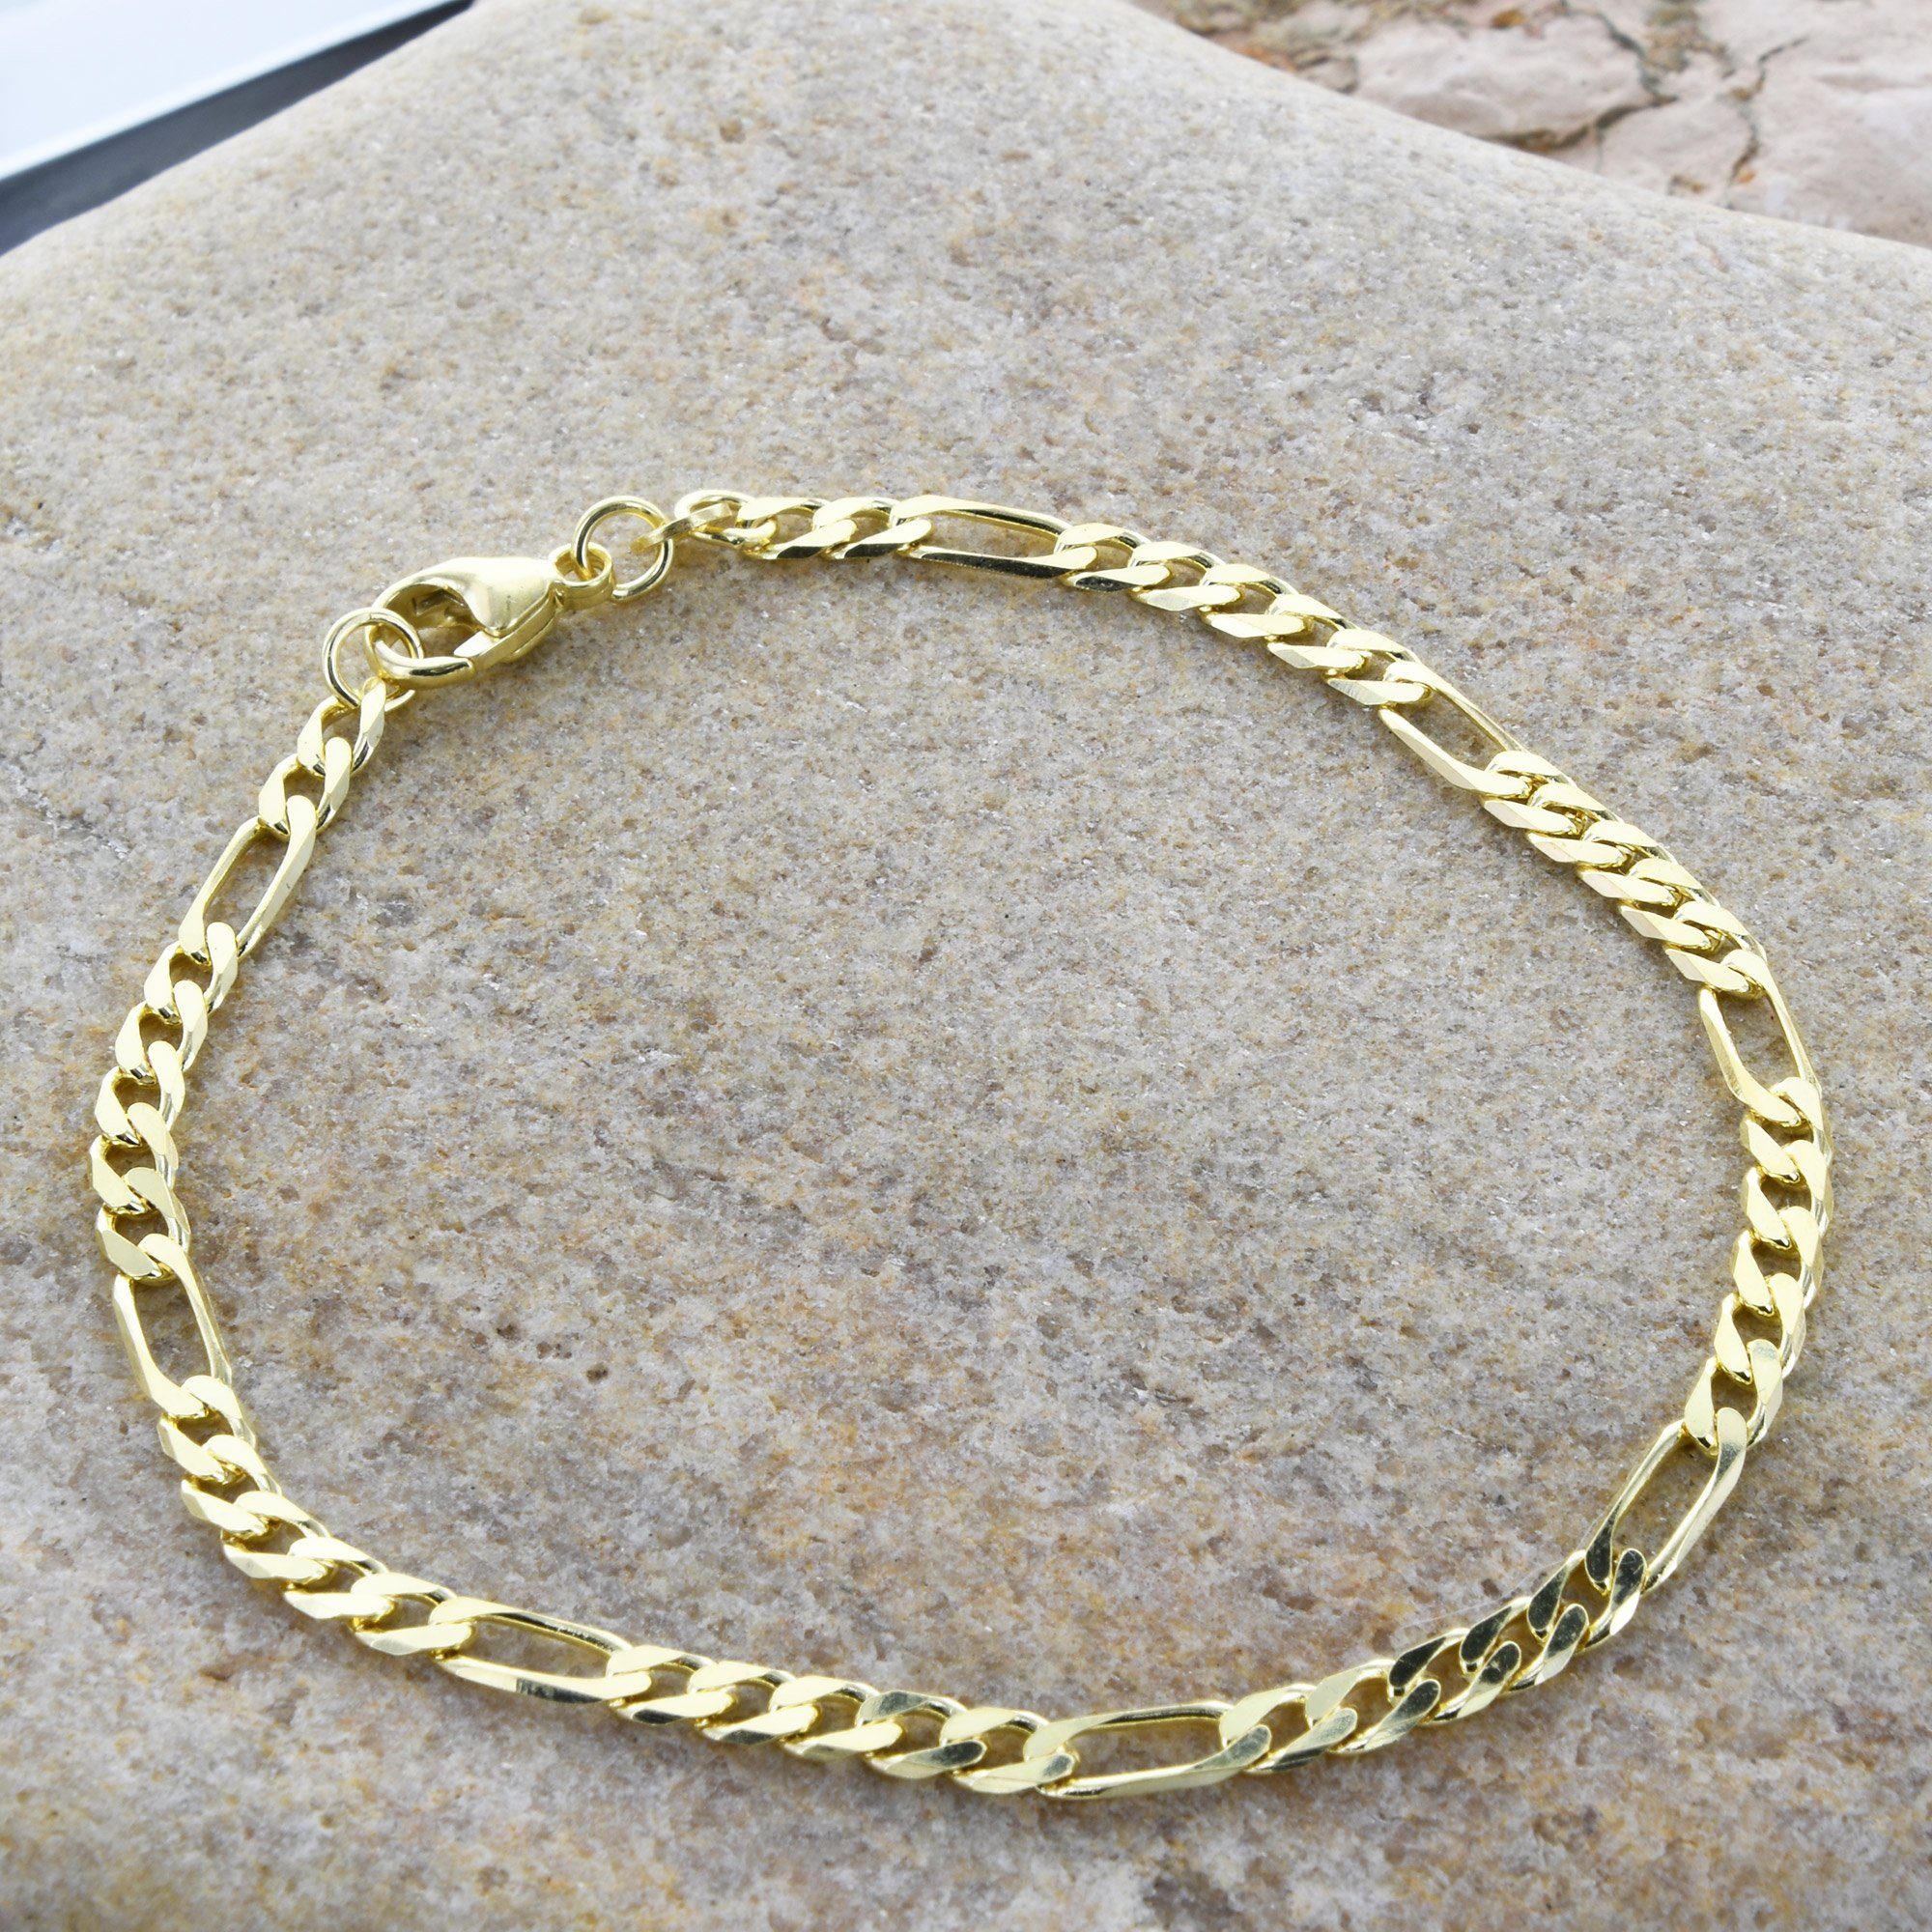 Goldkette, Made in HOPLO Germany